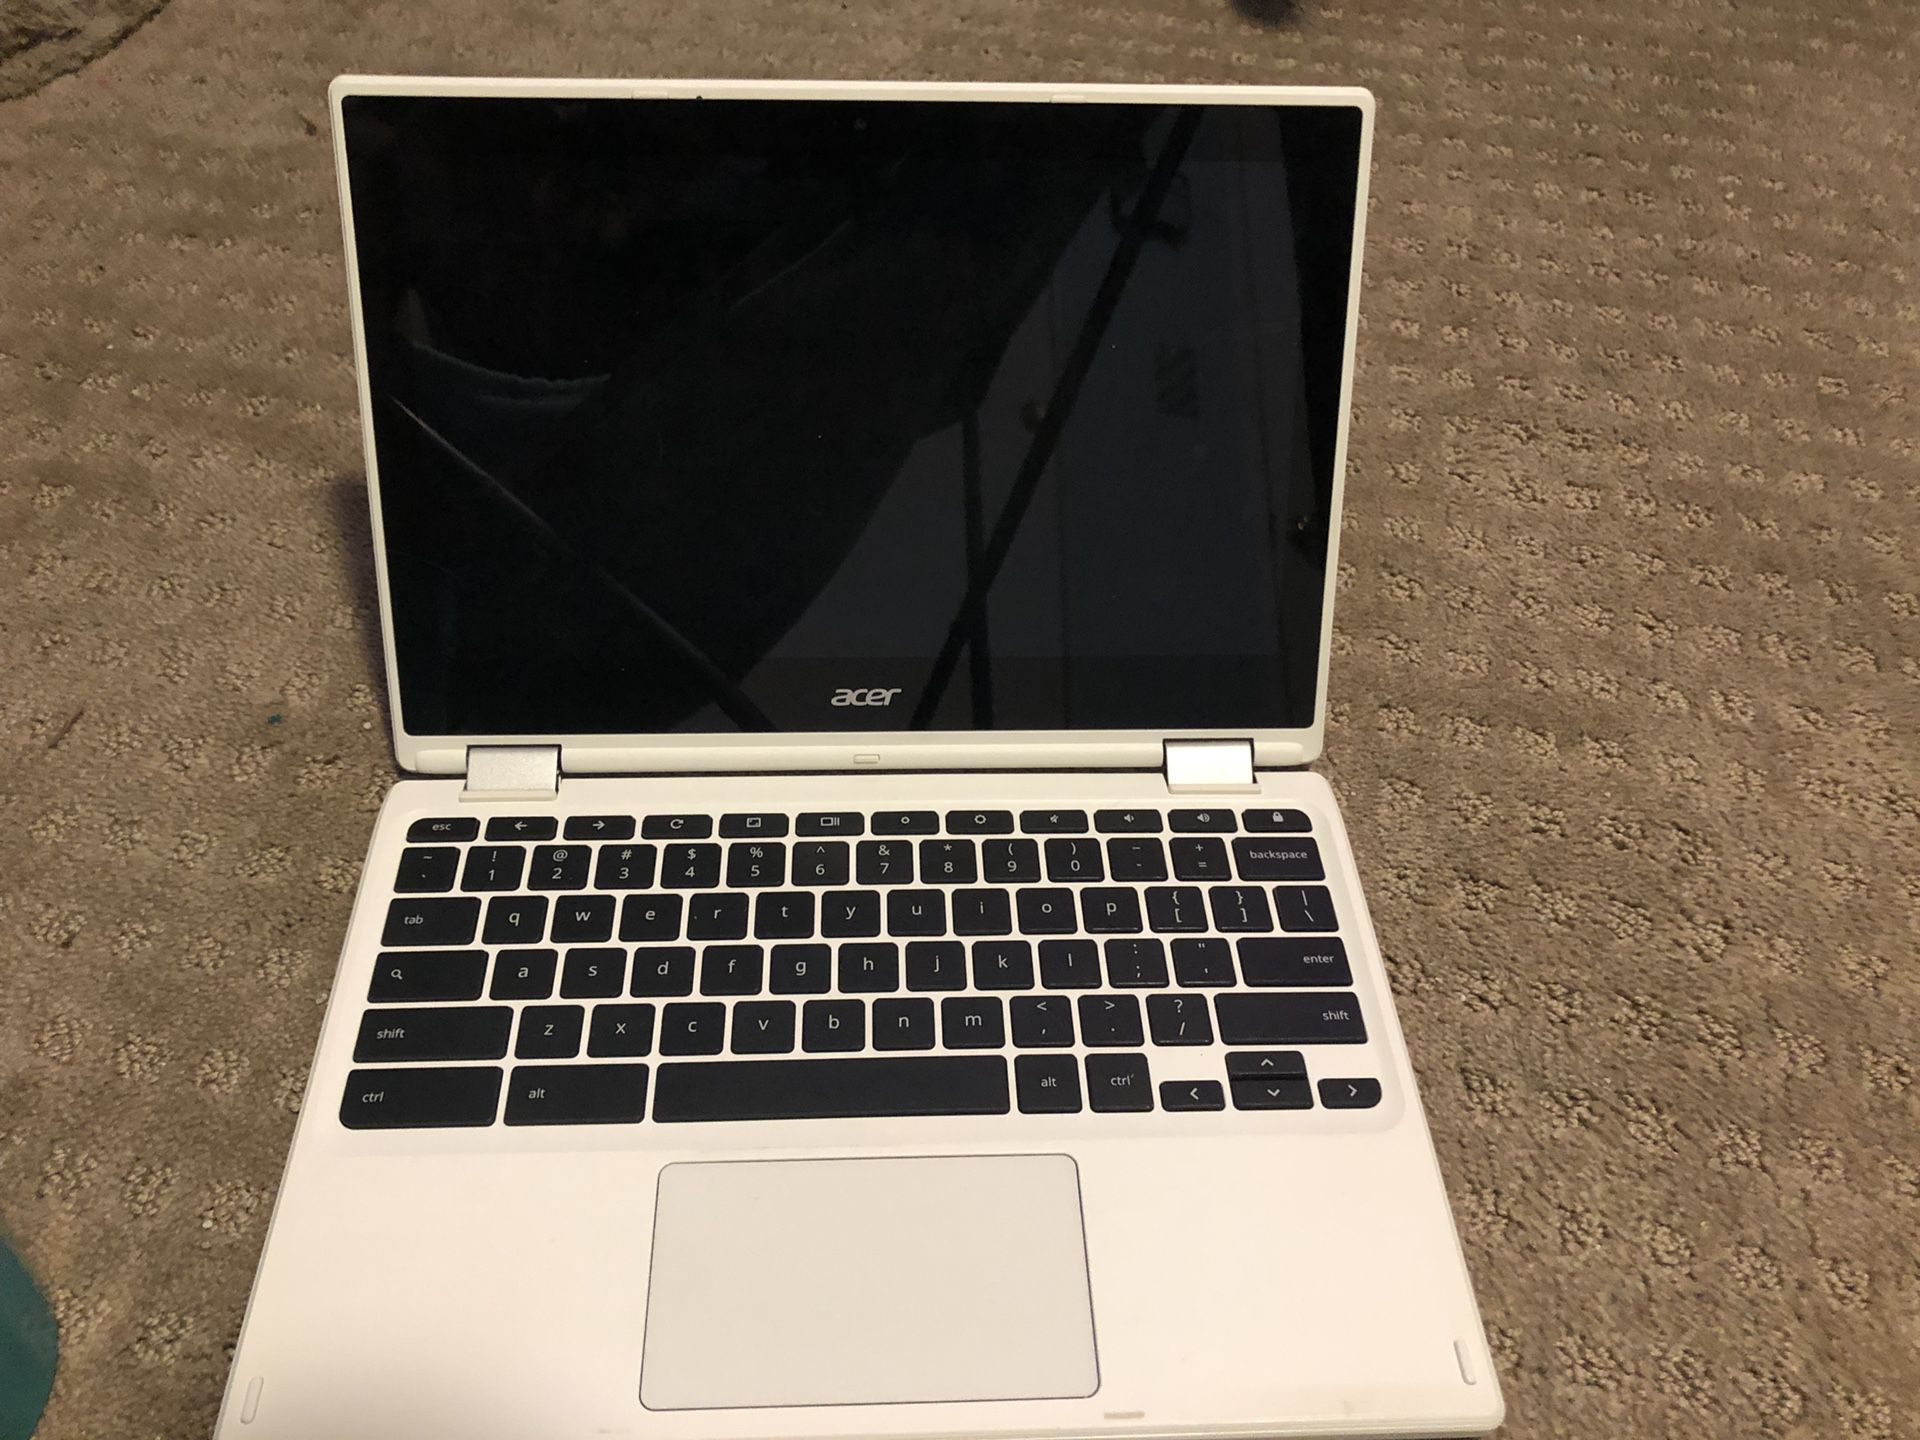 Acer chromebook touch screen - in great condition